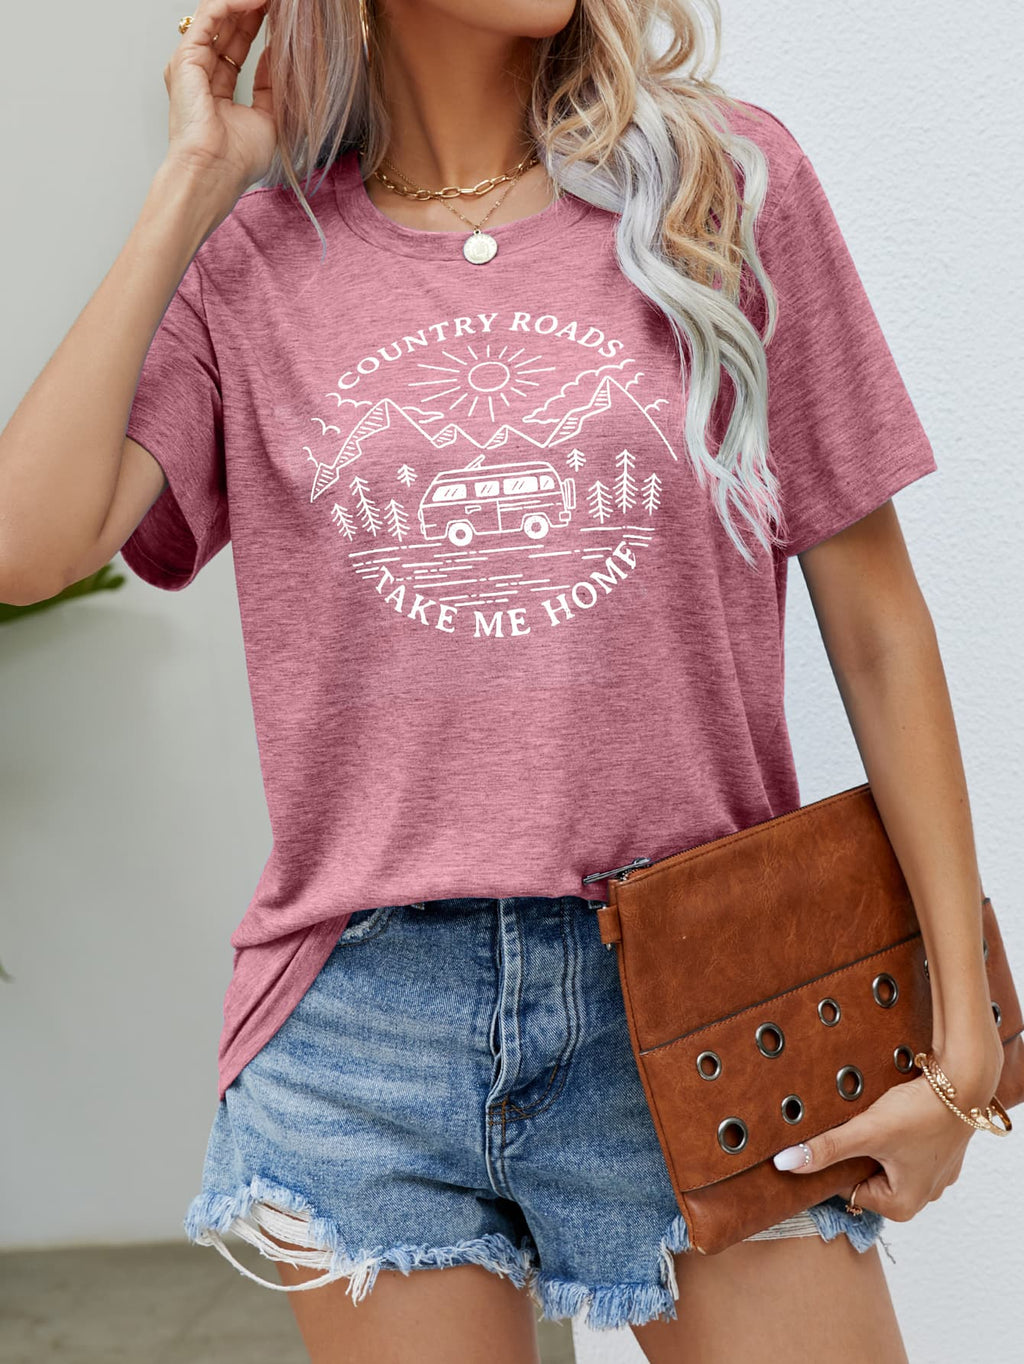 COUNTRY ROADS TAKE ME HOME Graphic Tee (5 Colors)  Krazy Heart Designs Boutique Light Mauve S 